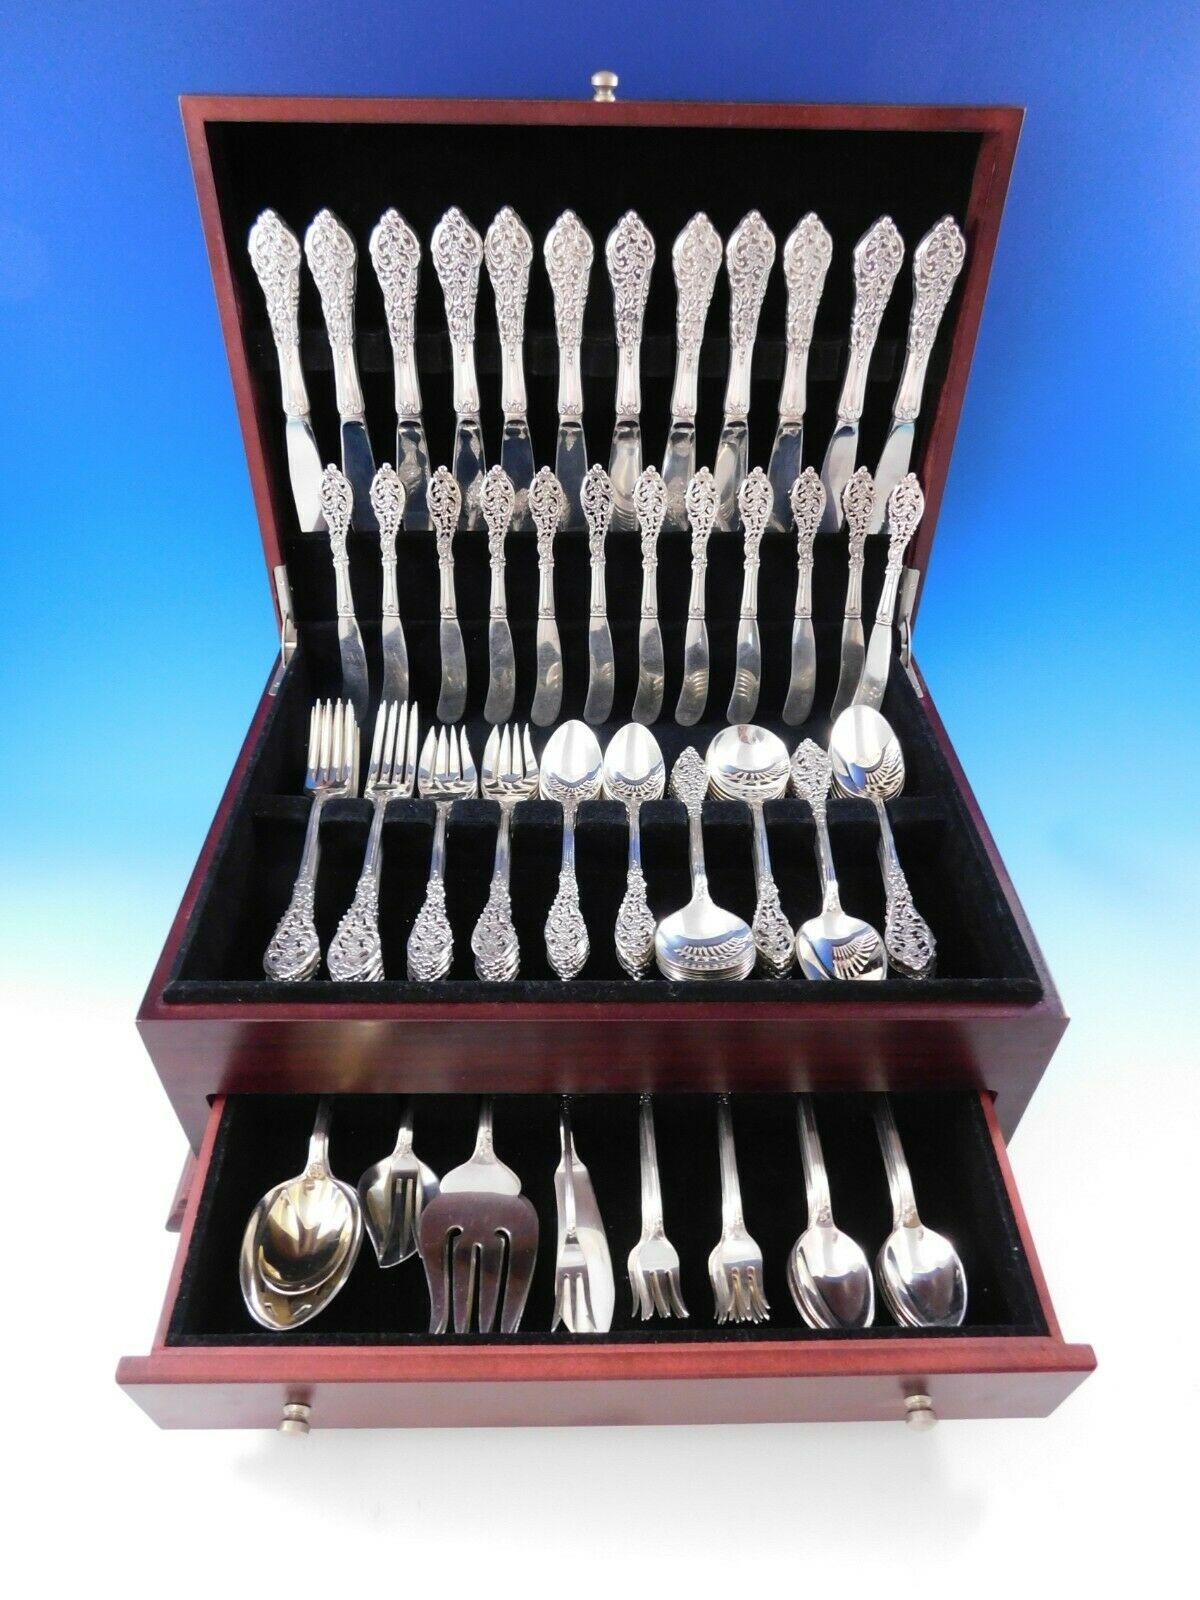 Monumental Florentine Lace by Reed & Barton sterling silver flatware set, 117 pieces. This pattern features a stunning pieced handle and delicate lace-like detail. This set includes:

12 knives, 9